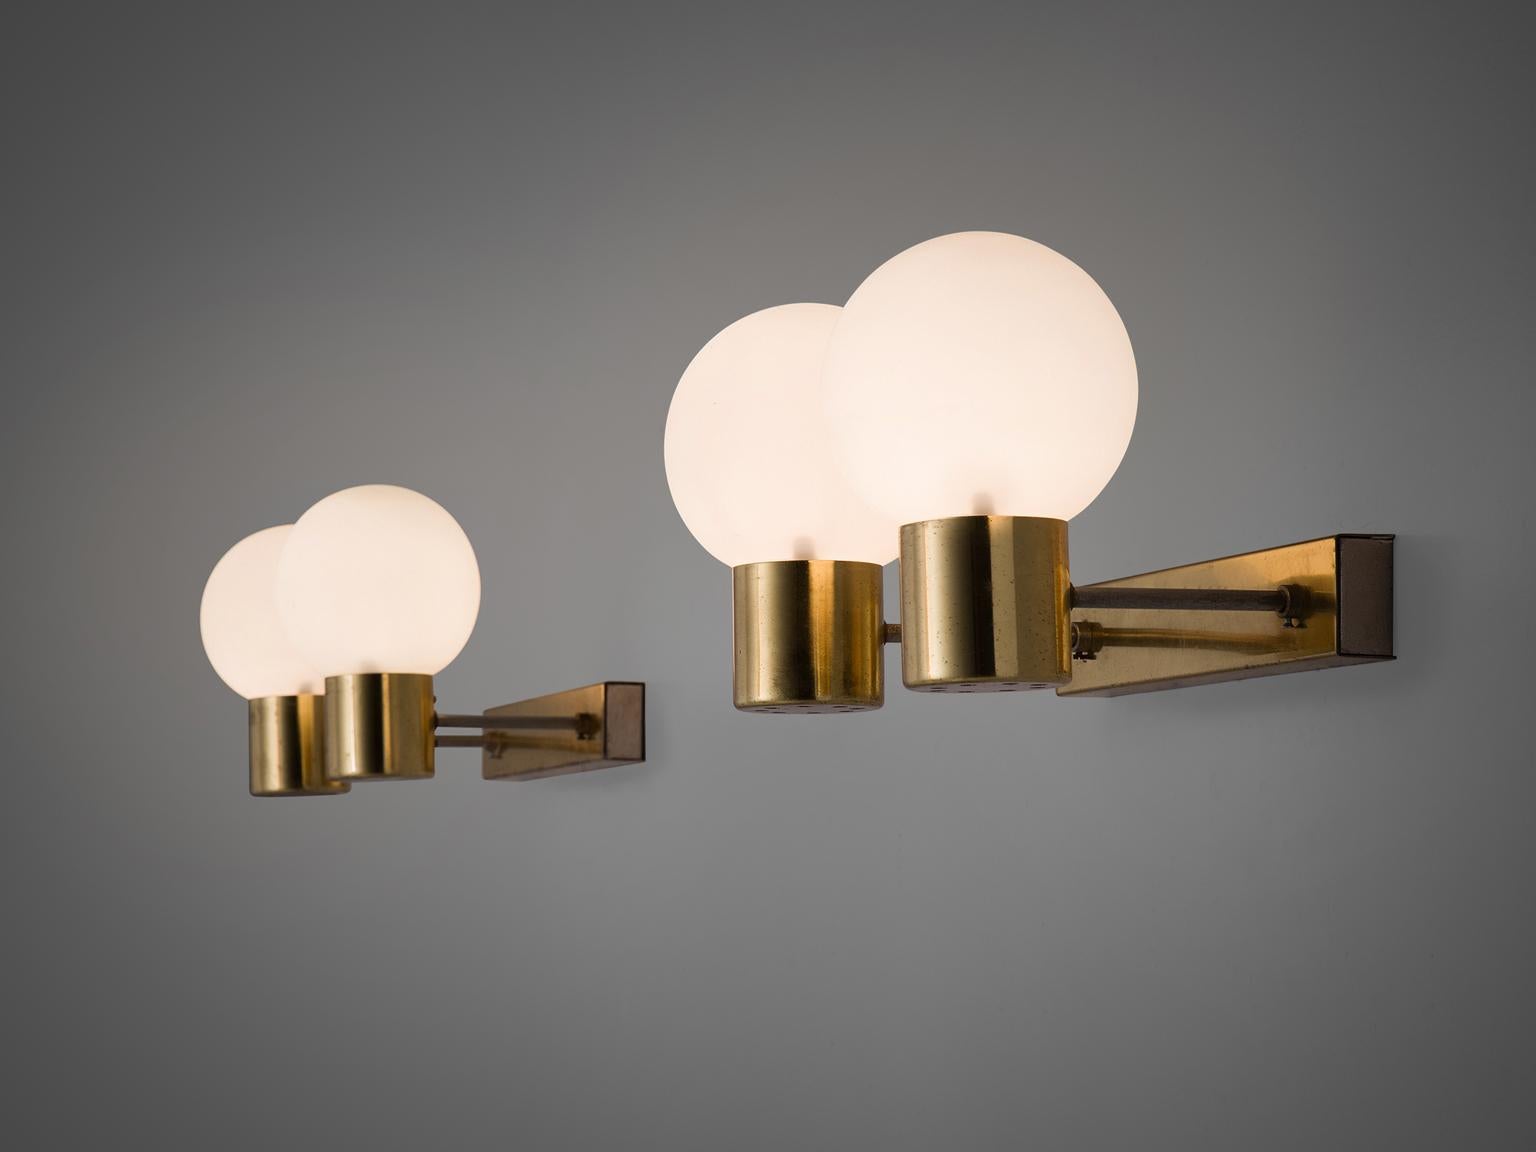 Wall lights in brass and opaline glass, Europe, 1960s. 

Set of 2 solid brass sconces with glass shades with a warm opaline white shade. The lights each have relatively long arms ending in an opaline light bulb. These wall scones have a very natural